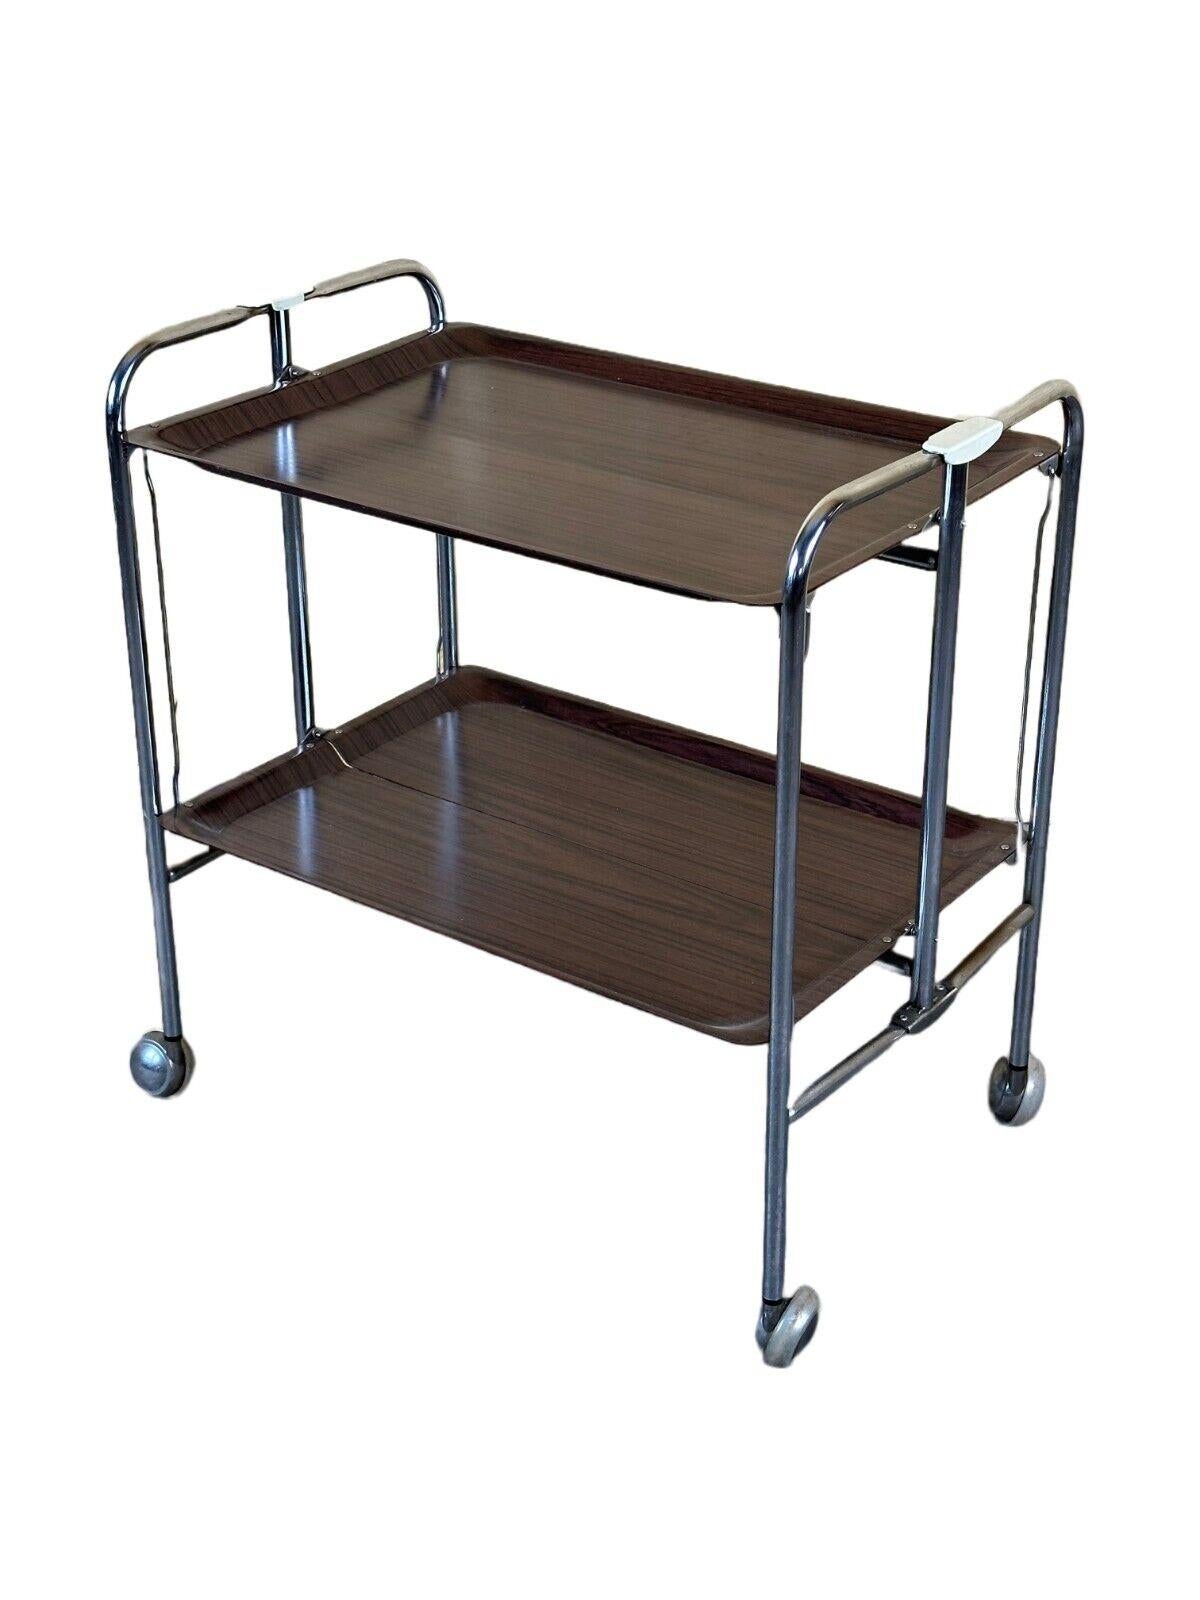 60s 70s serving trolley dinette side table space age brown design

Object: serving trolley

Manufacturer:

Condition: good - vintage

Age: around 1960-1970

Dimensions:

Width = 66cm
Depth = 41.5cm
Height = 68.5cm

Material: metal, plastic

Other